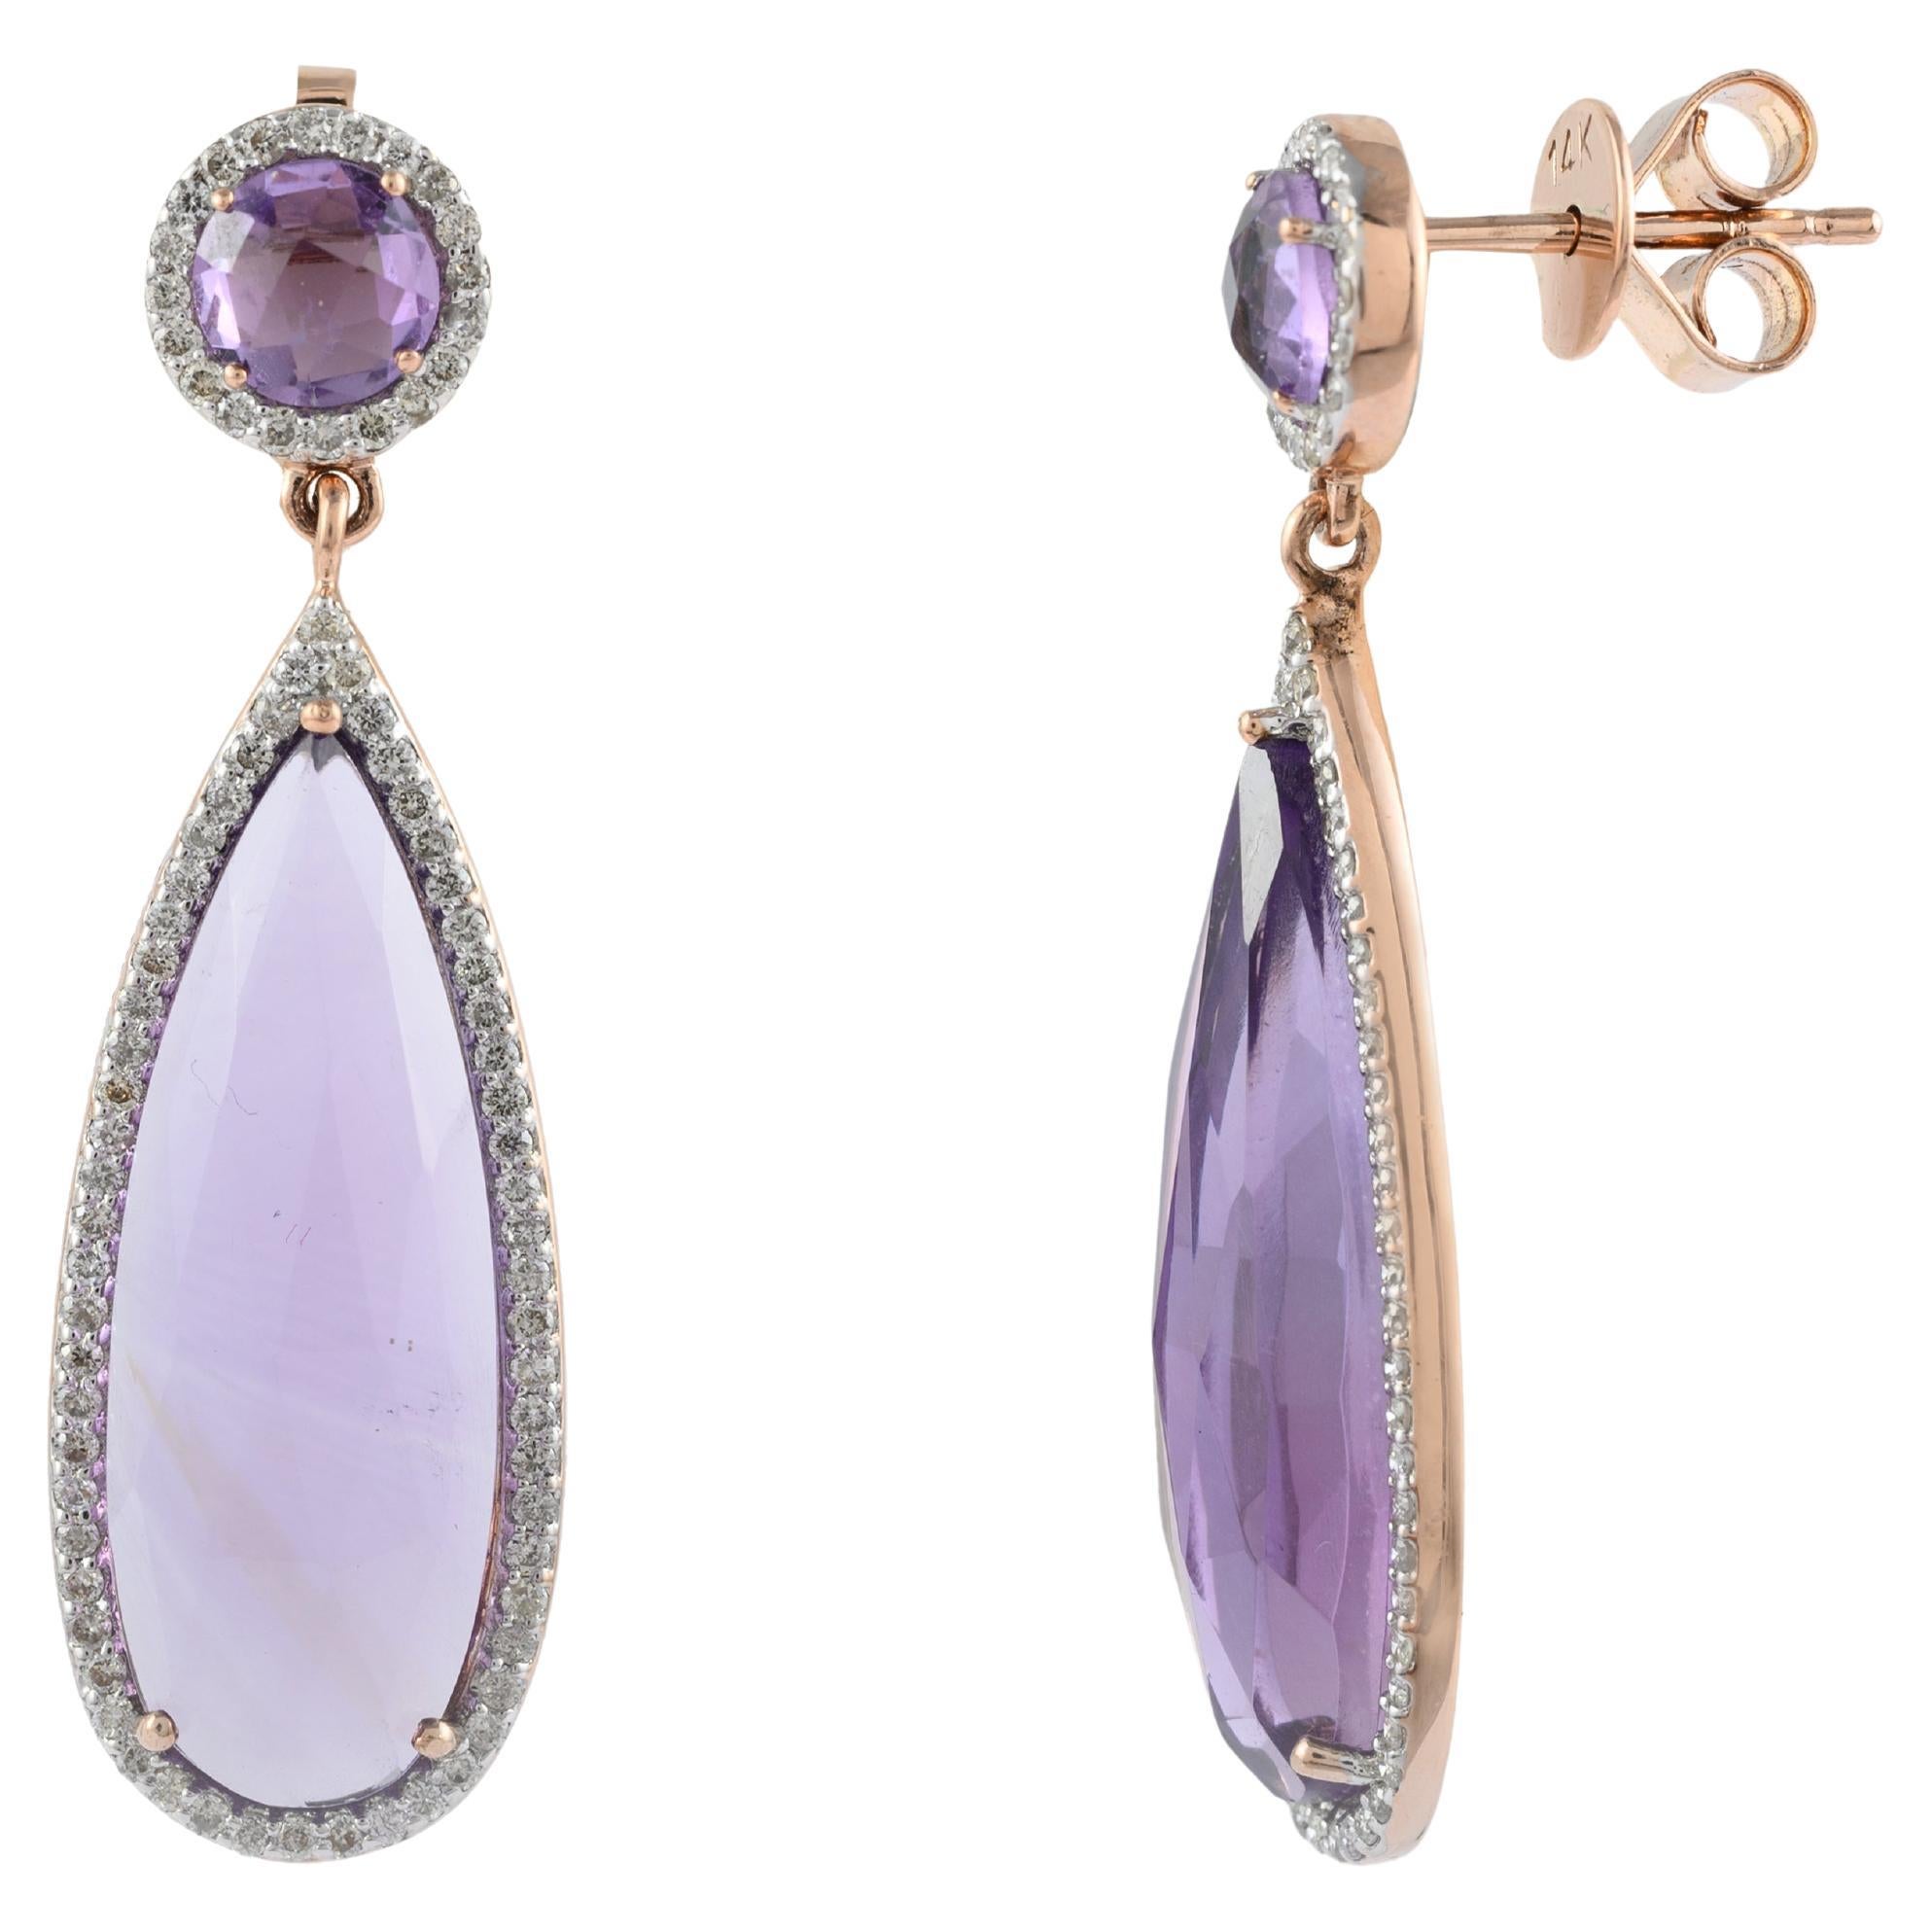 14k Rose Gold Magnificent 10.77ct Amethyst Dangle Drop Earrings with Diamonds